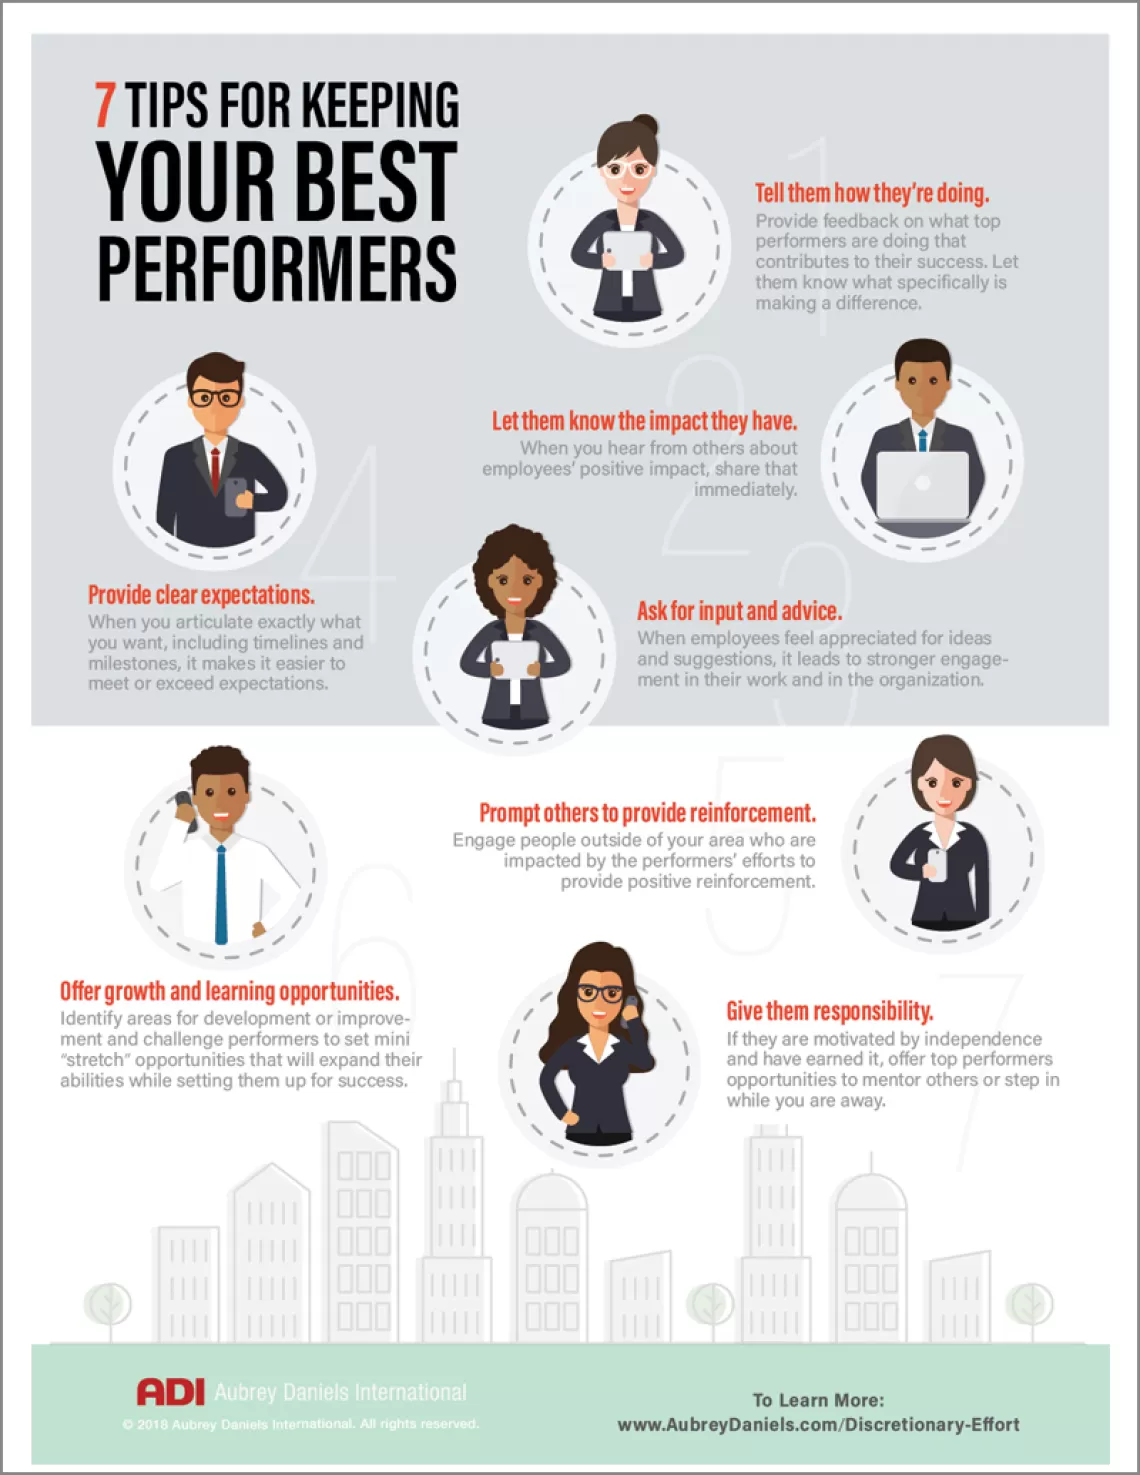 7 Tips for Keeping Your Best Performers